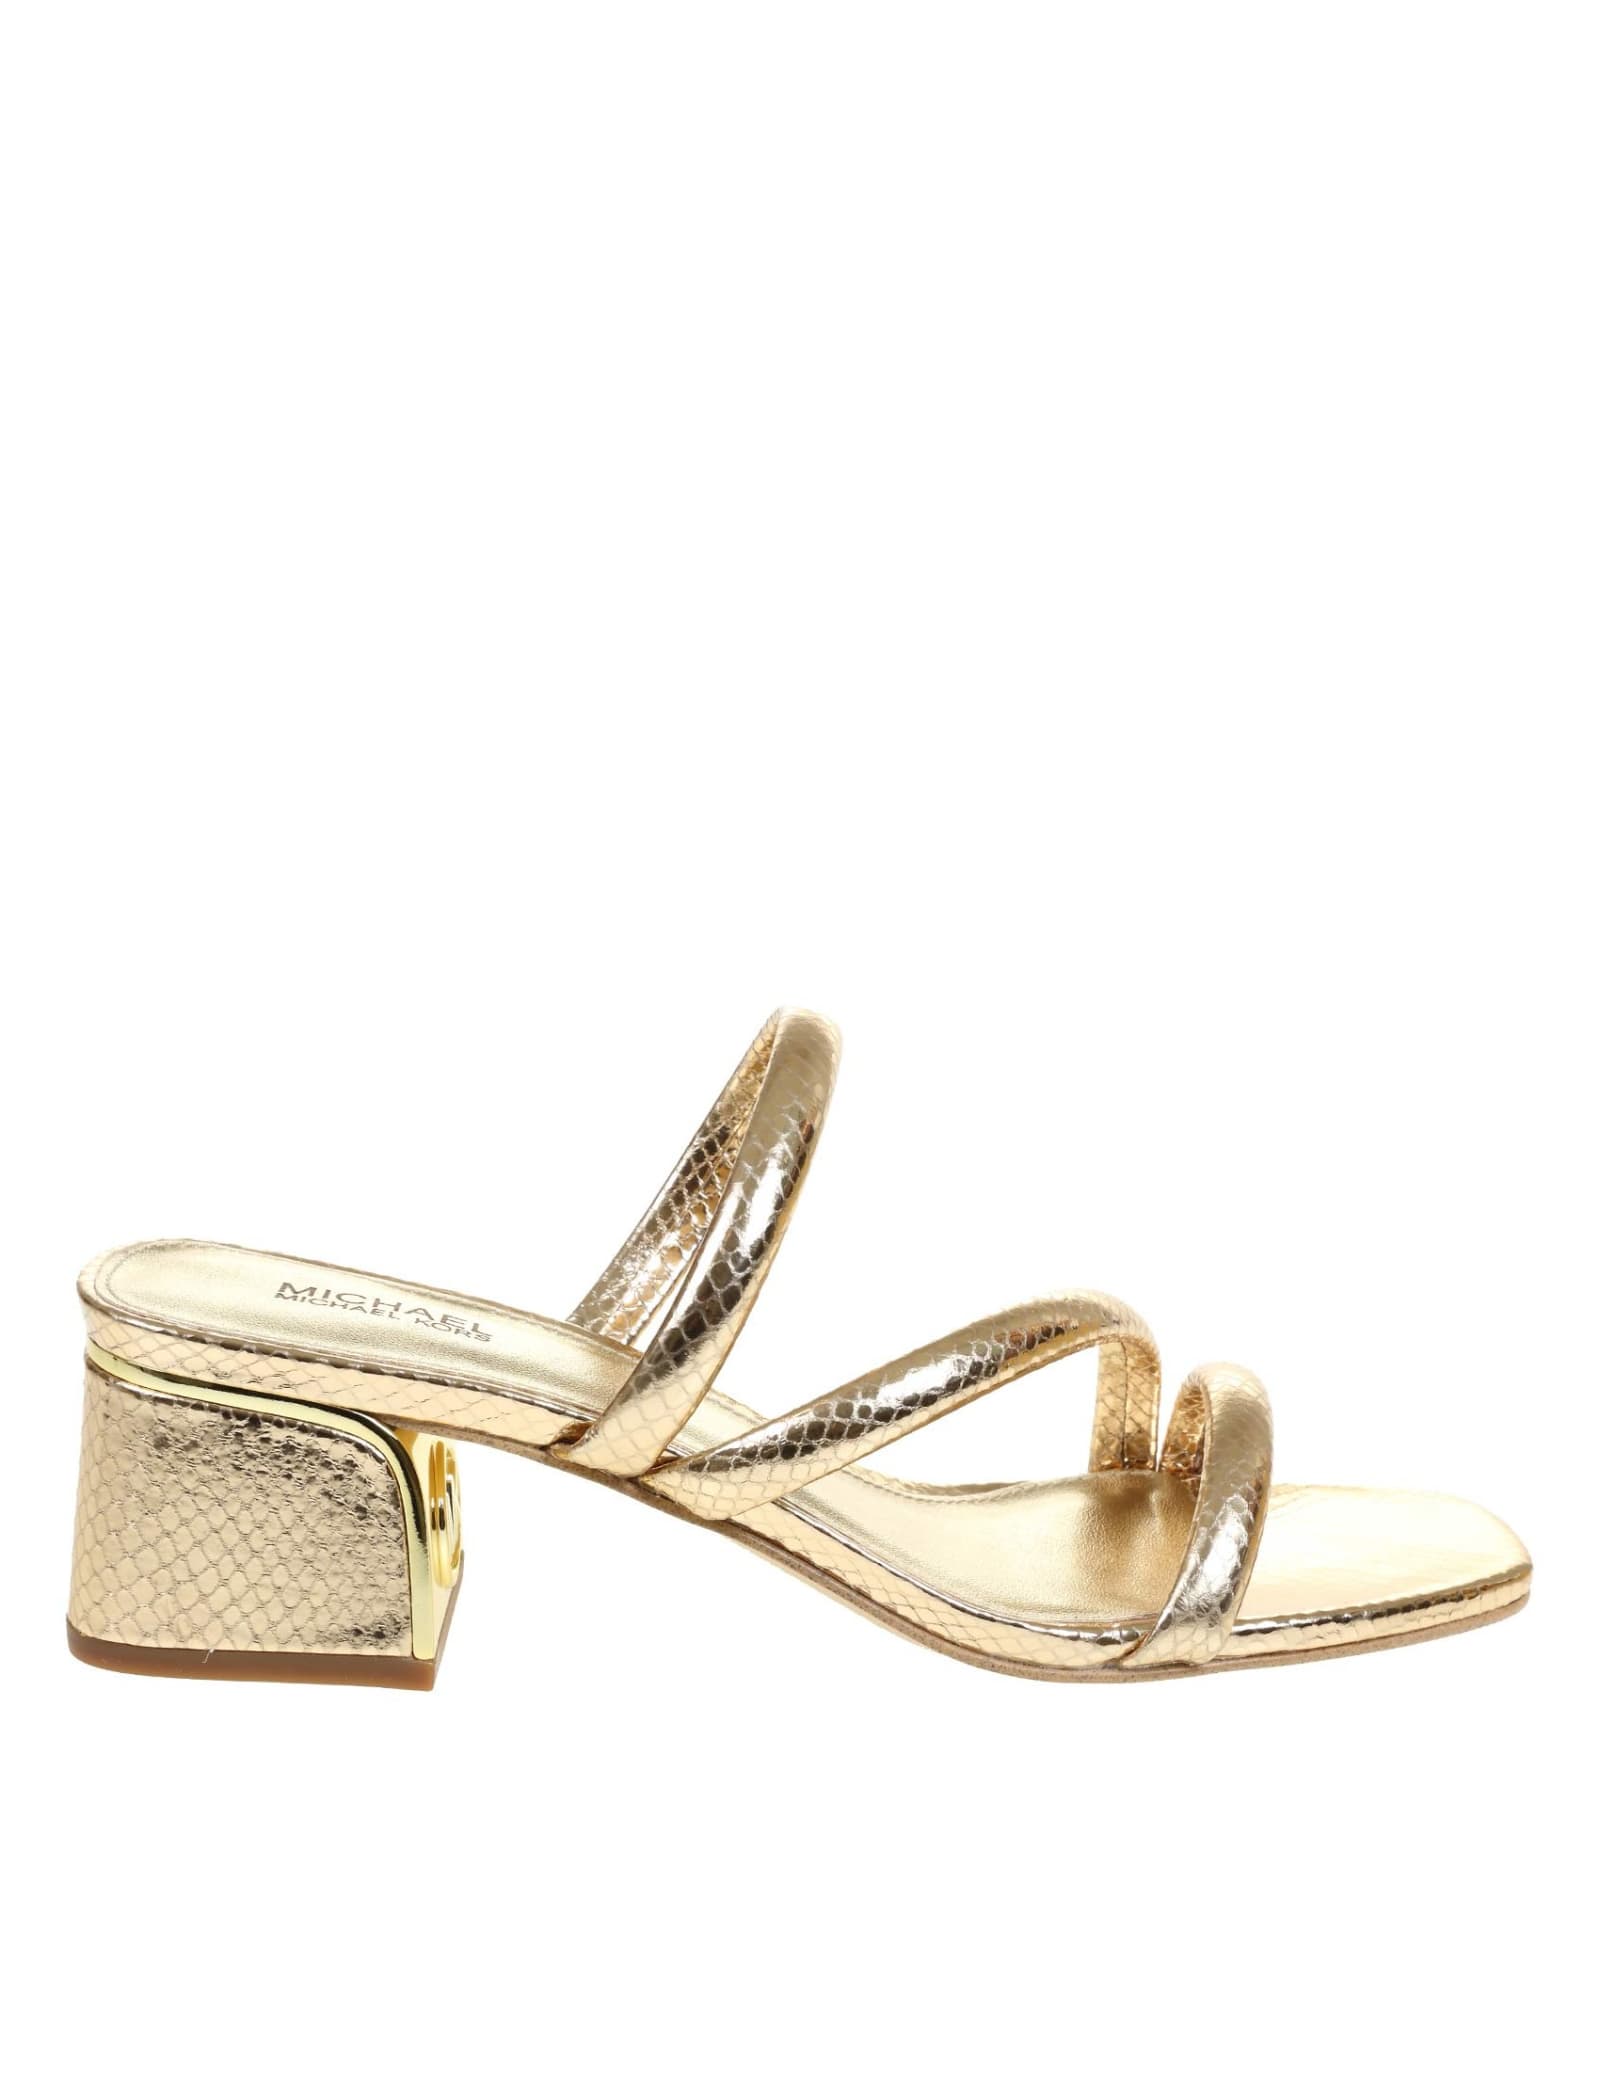 Michael Kors Lana Sandal In Laminated Leather With Python Print